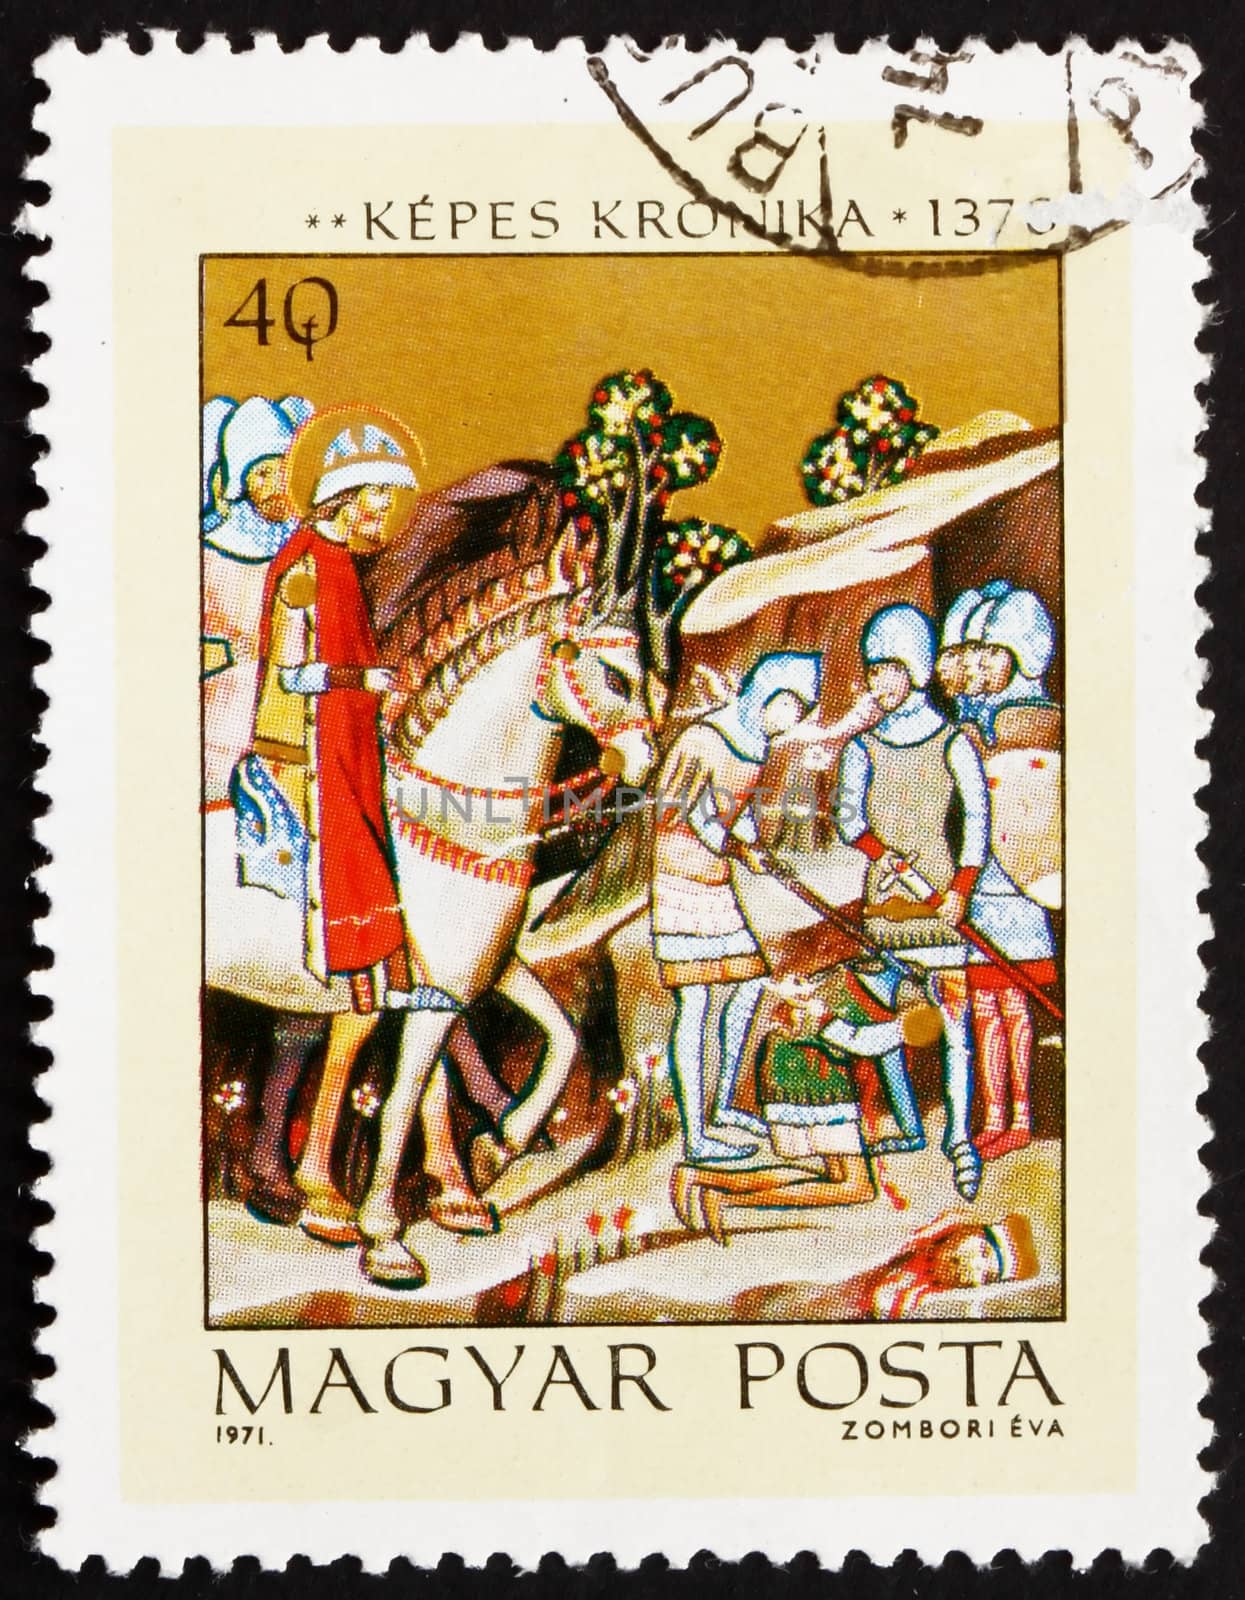 HUNGARY - CIRCA 1971: a stamp printed in the Hungary shows Beheading of Heathen Chief Koppany, History of Hungary, from Illuminated Chronicle of King Louis the Great, circa 1971